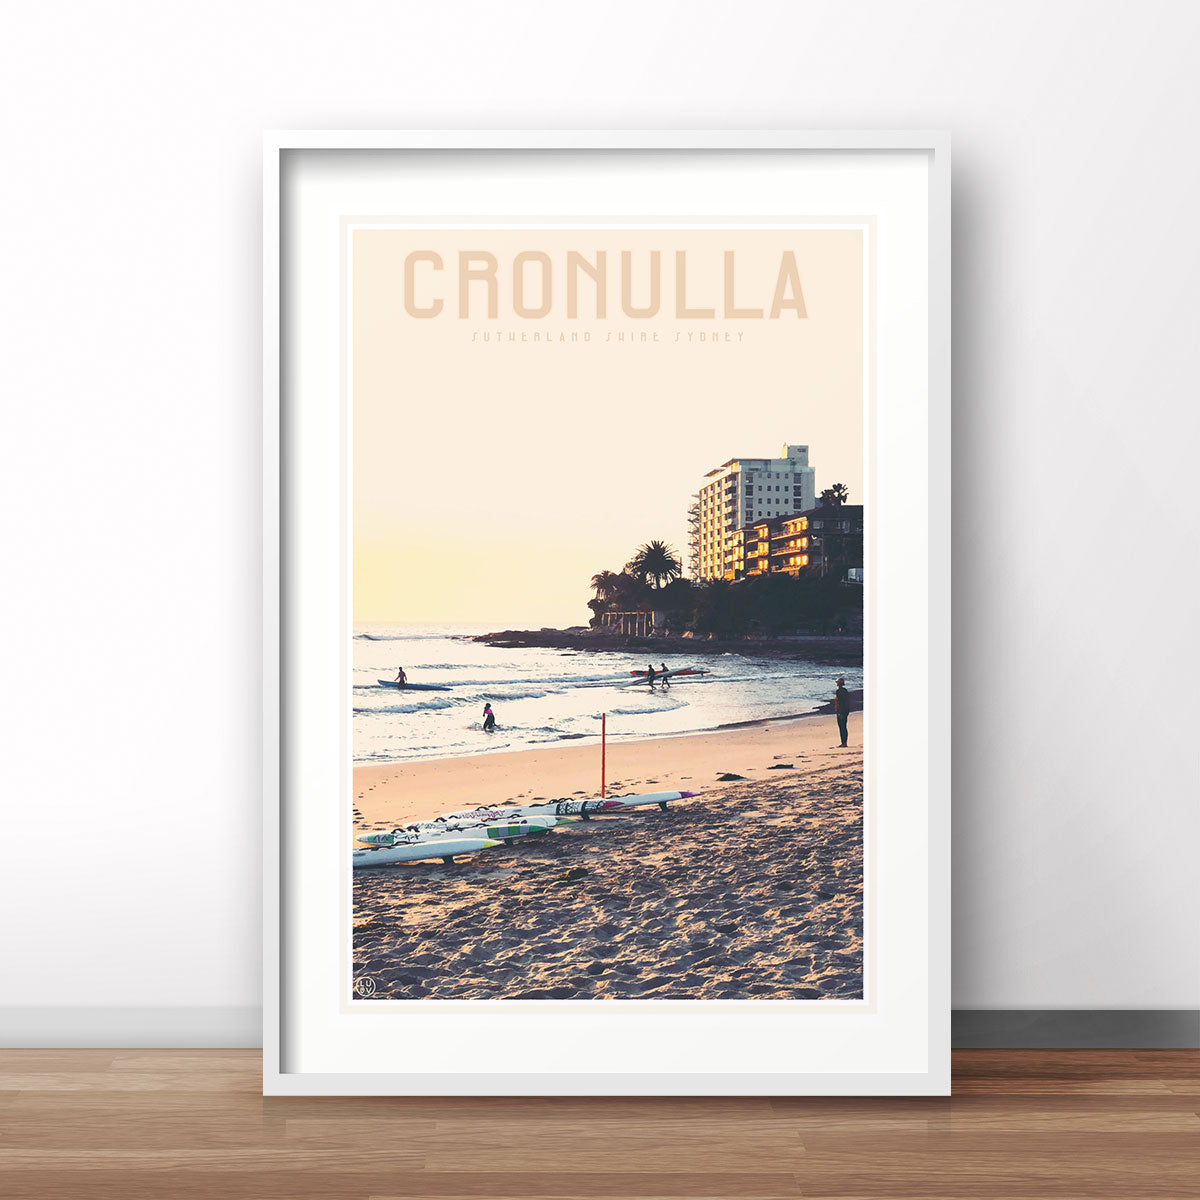 Cronulla Beach vintage style travel print designed by places we luv